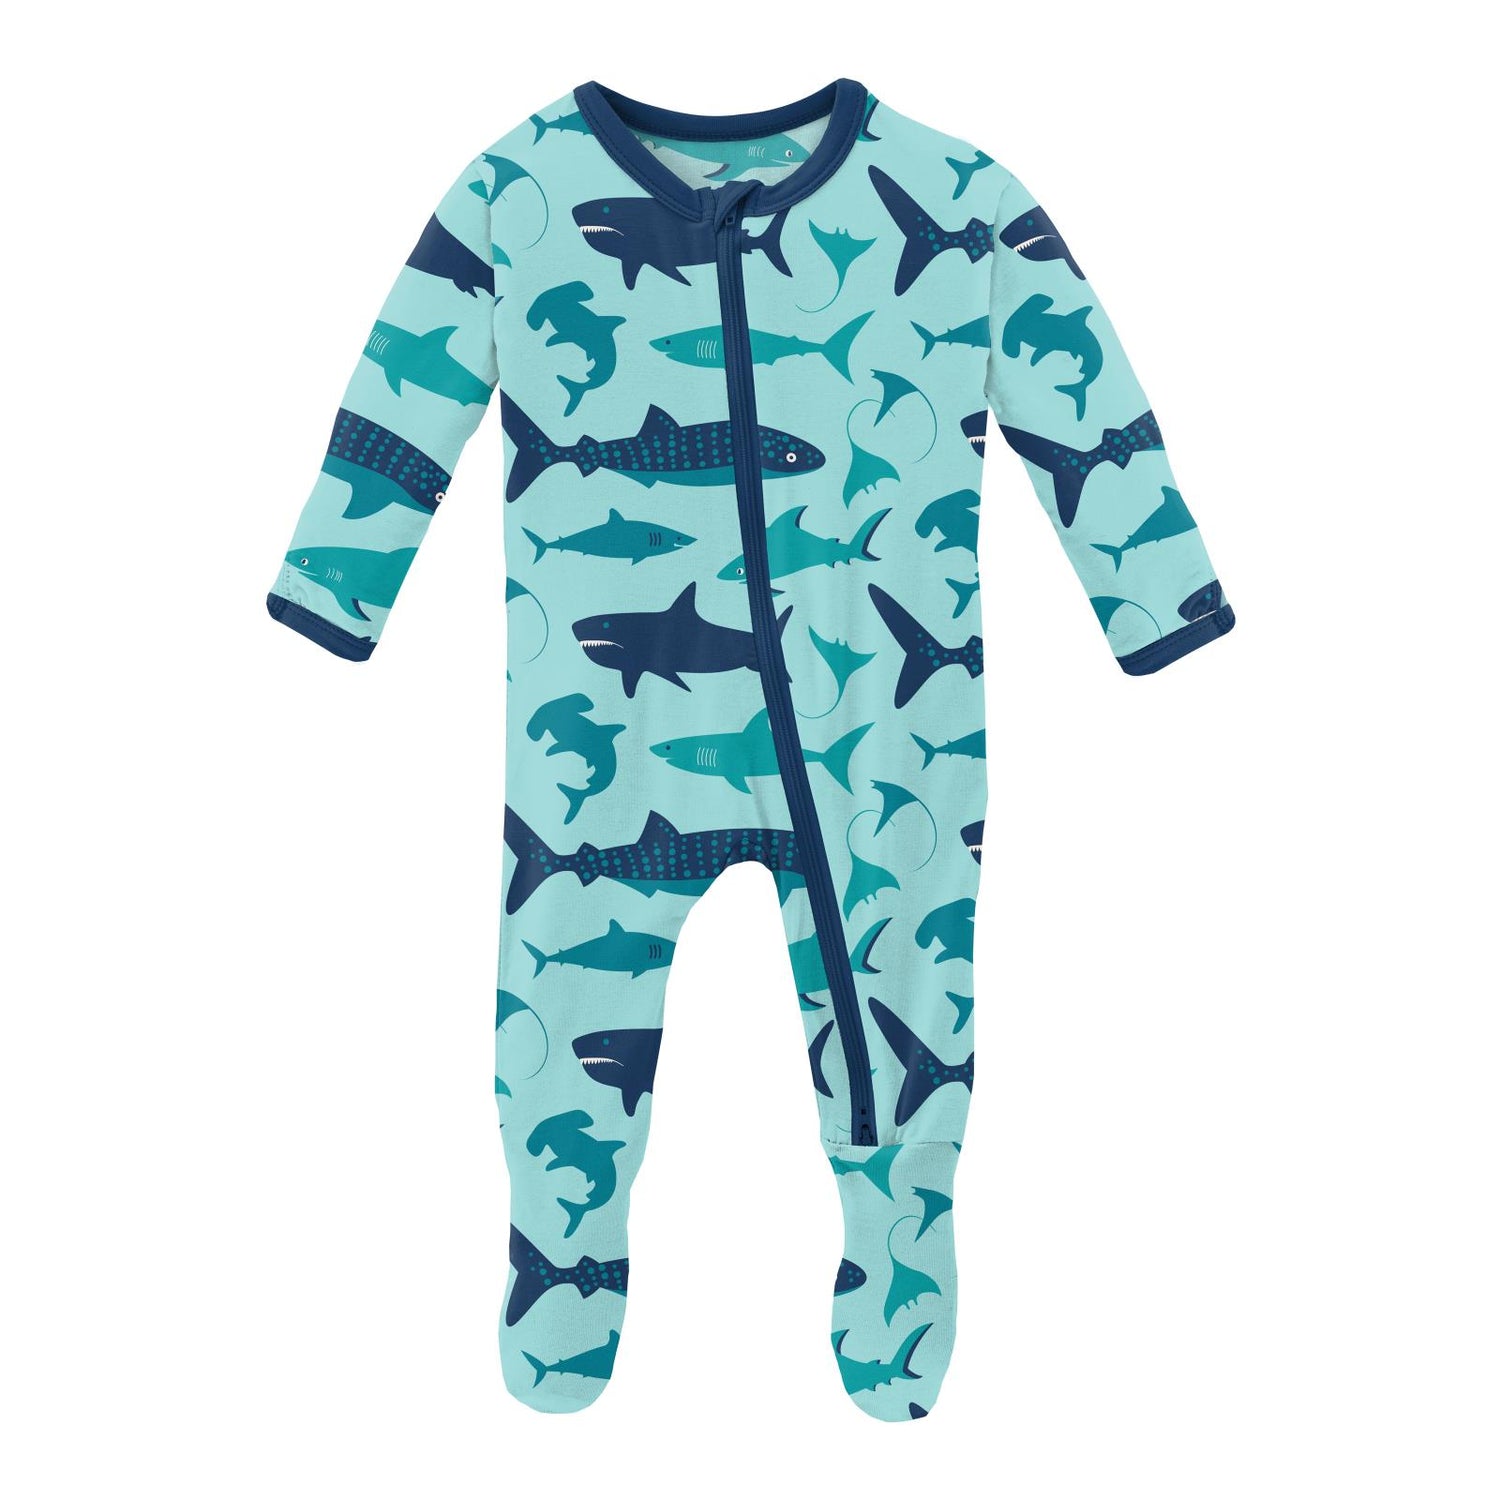 KicKee Pants Little Boys Print Footie with Snaps - Pond Rainbow, 9-12 Months